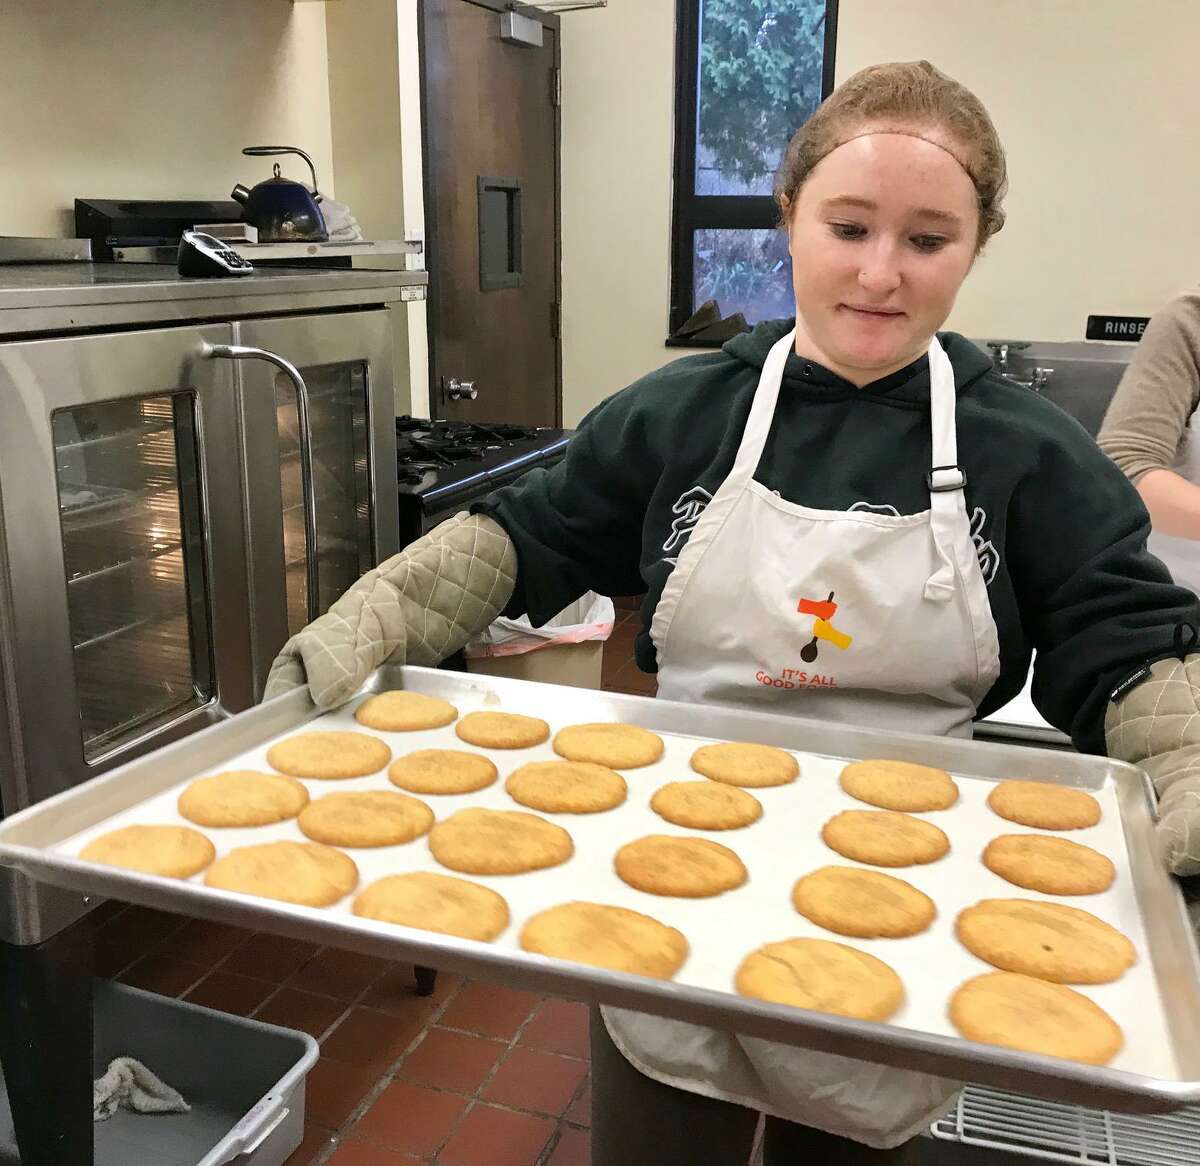 Right, the scent of cinnamon fills the air as Melissa Weaver, a senior at Sacred Heart University, removes a tray of snickerdoodles from the oven.